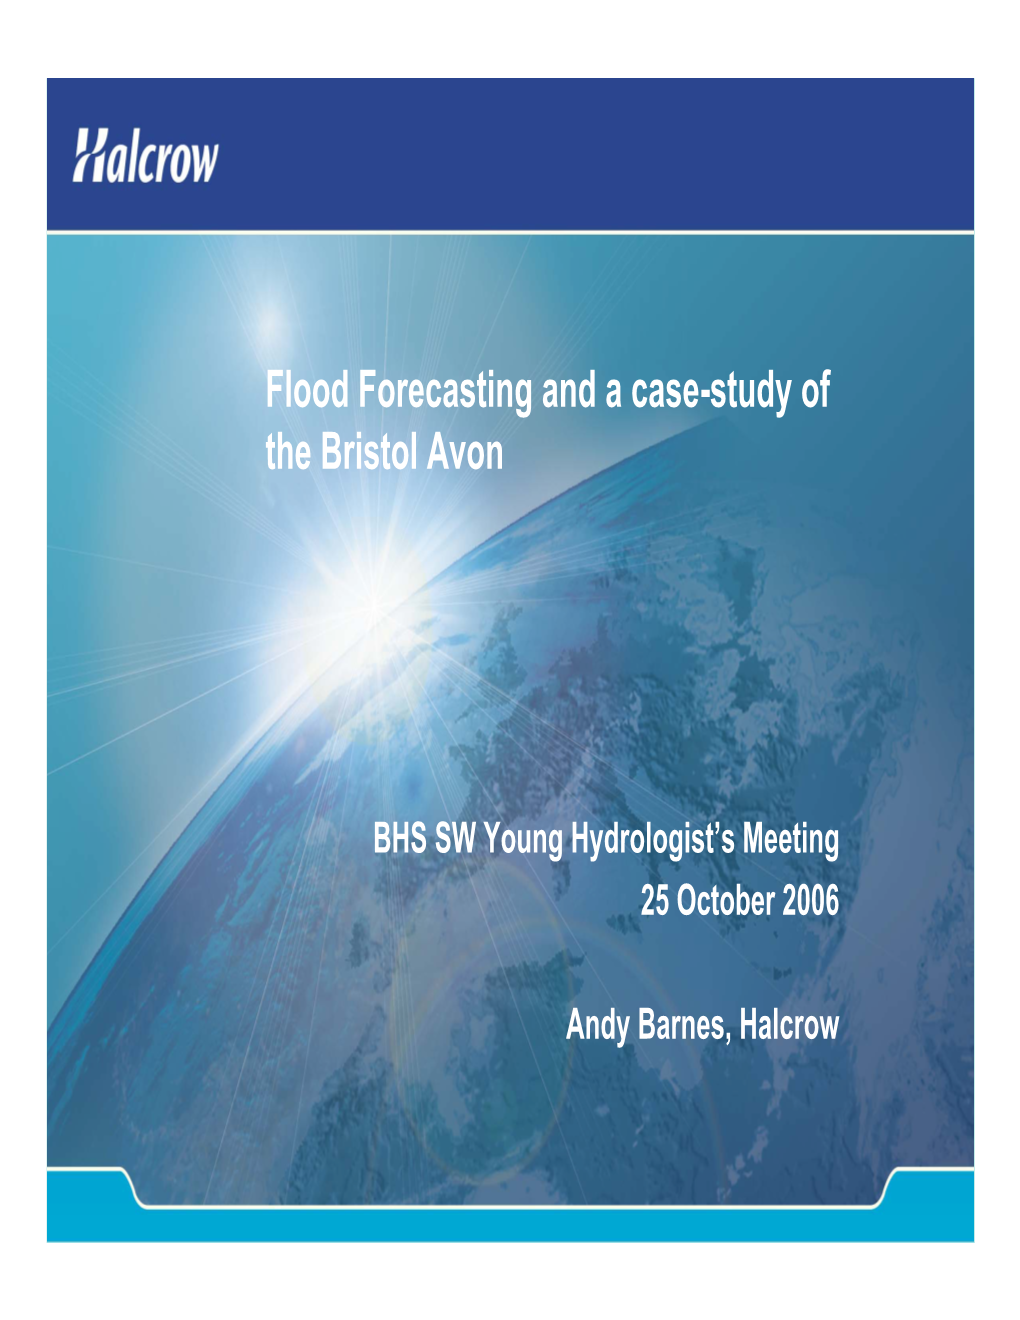 Flood Forecasting and a Case-Study of the Bristol Avon